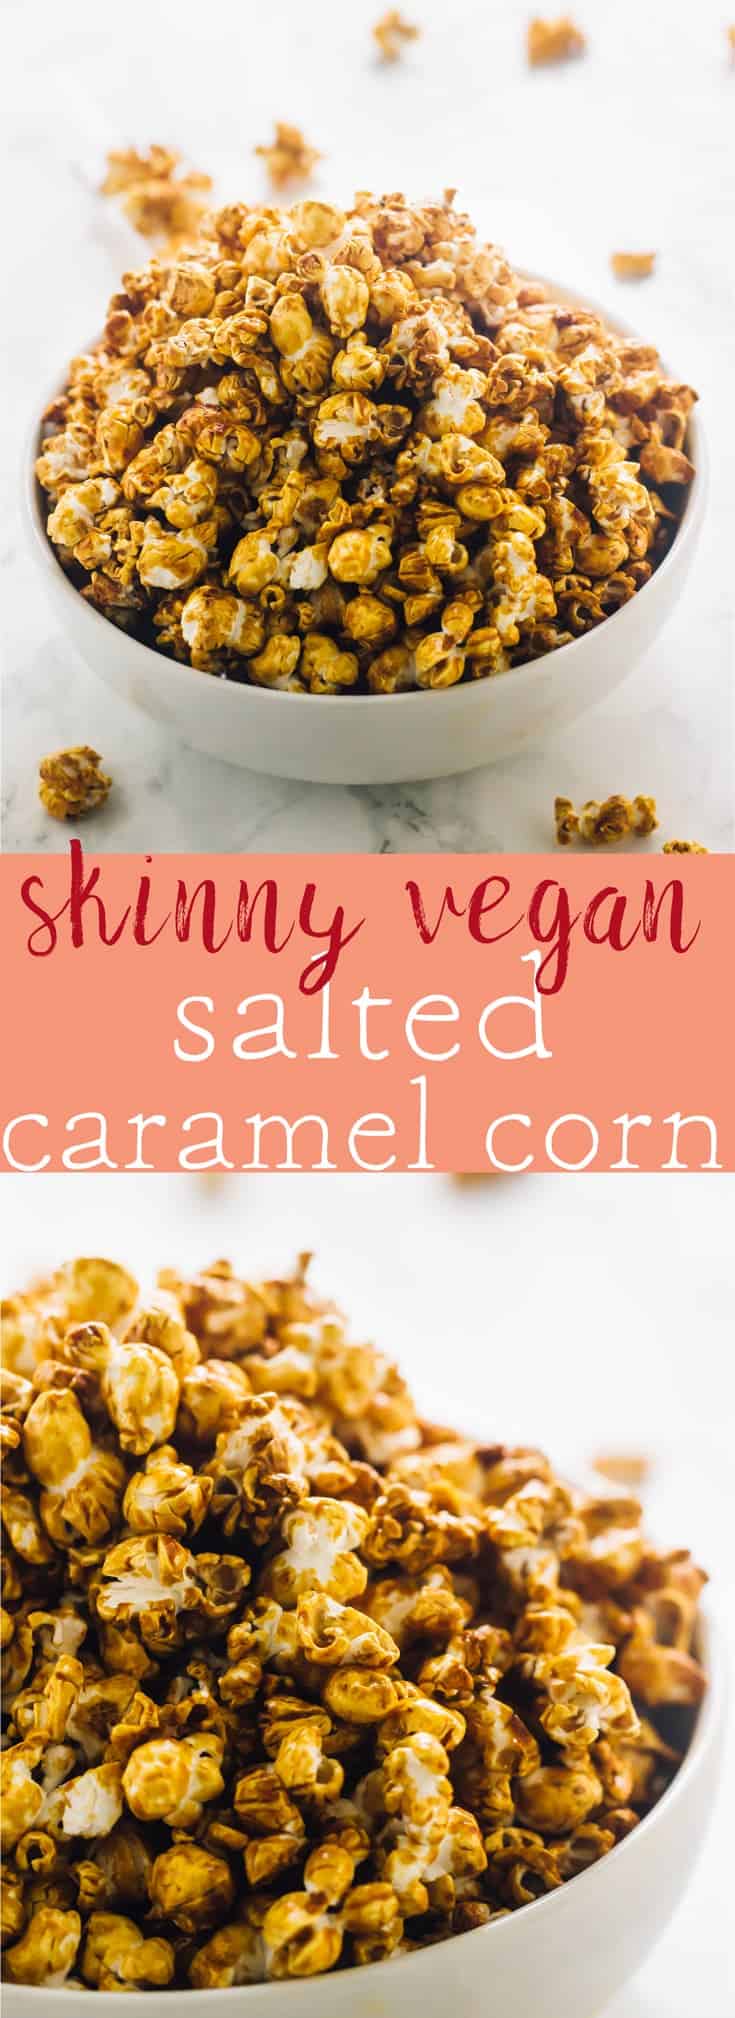 This Vegan Caramel Popcorn is healthy & made with 7 ingredients in just 25 minutes. It's SO addictive, really easy to make and perfect for parties or gifts! via https://jessicainthekitchen.com